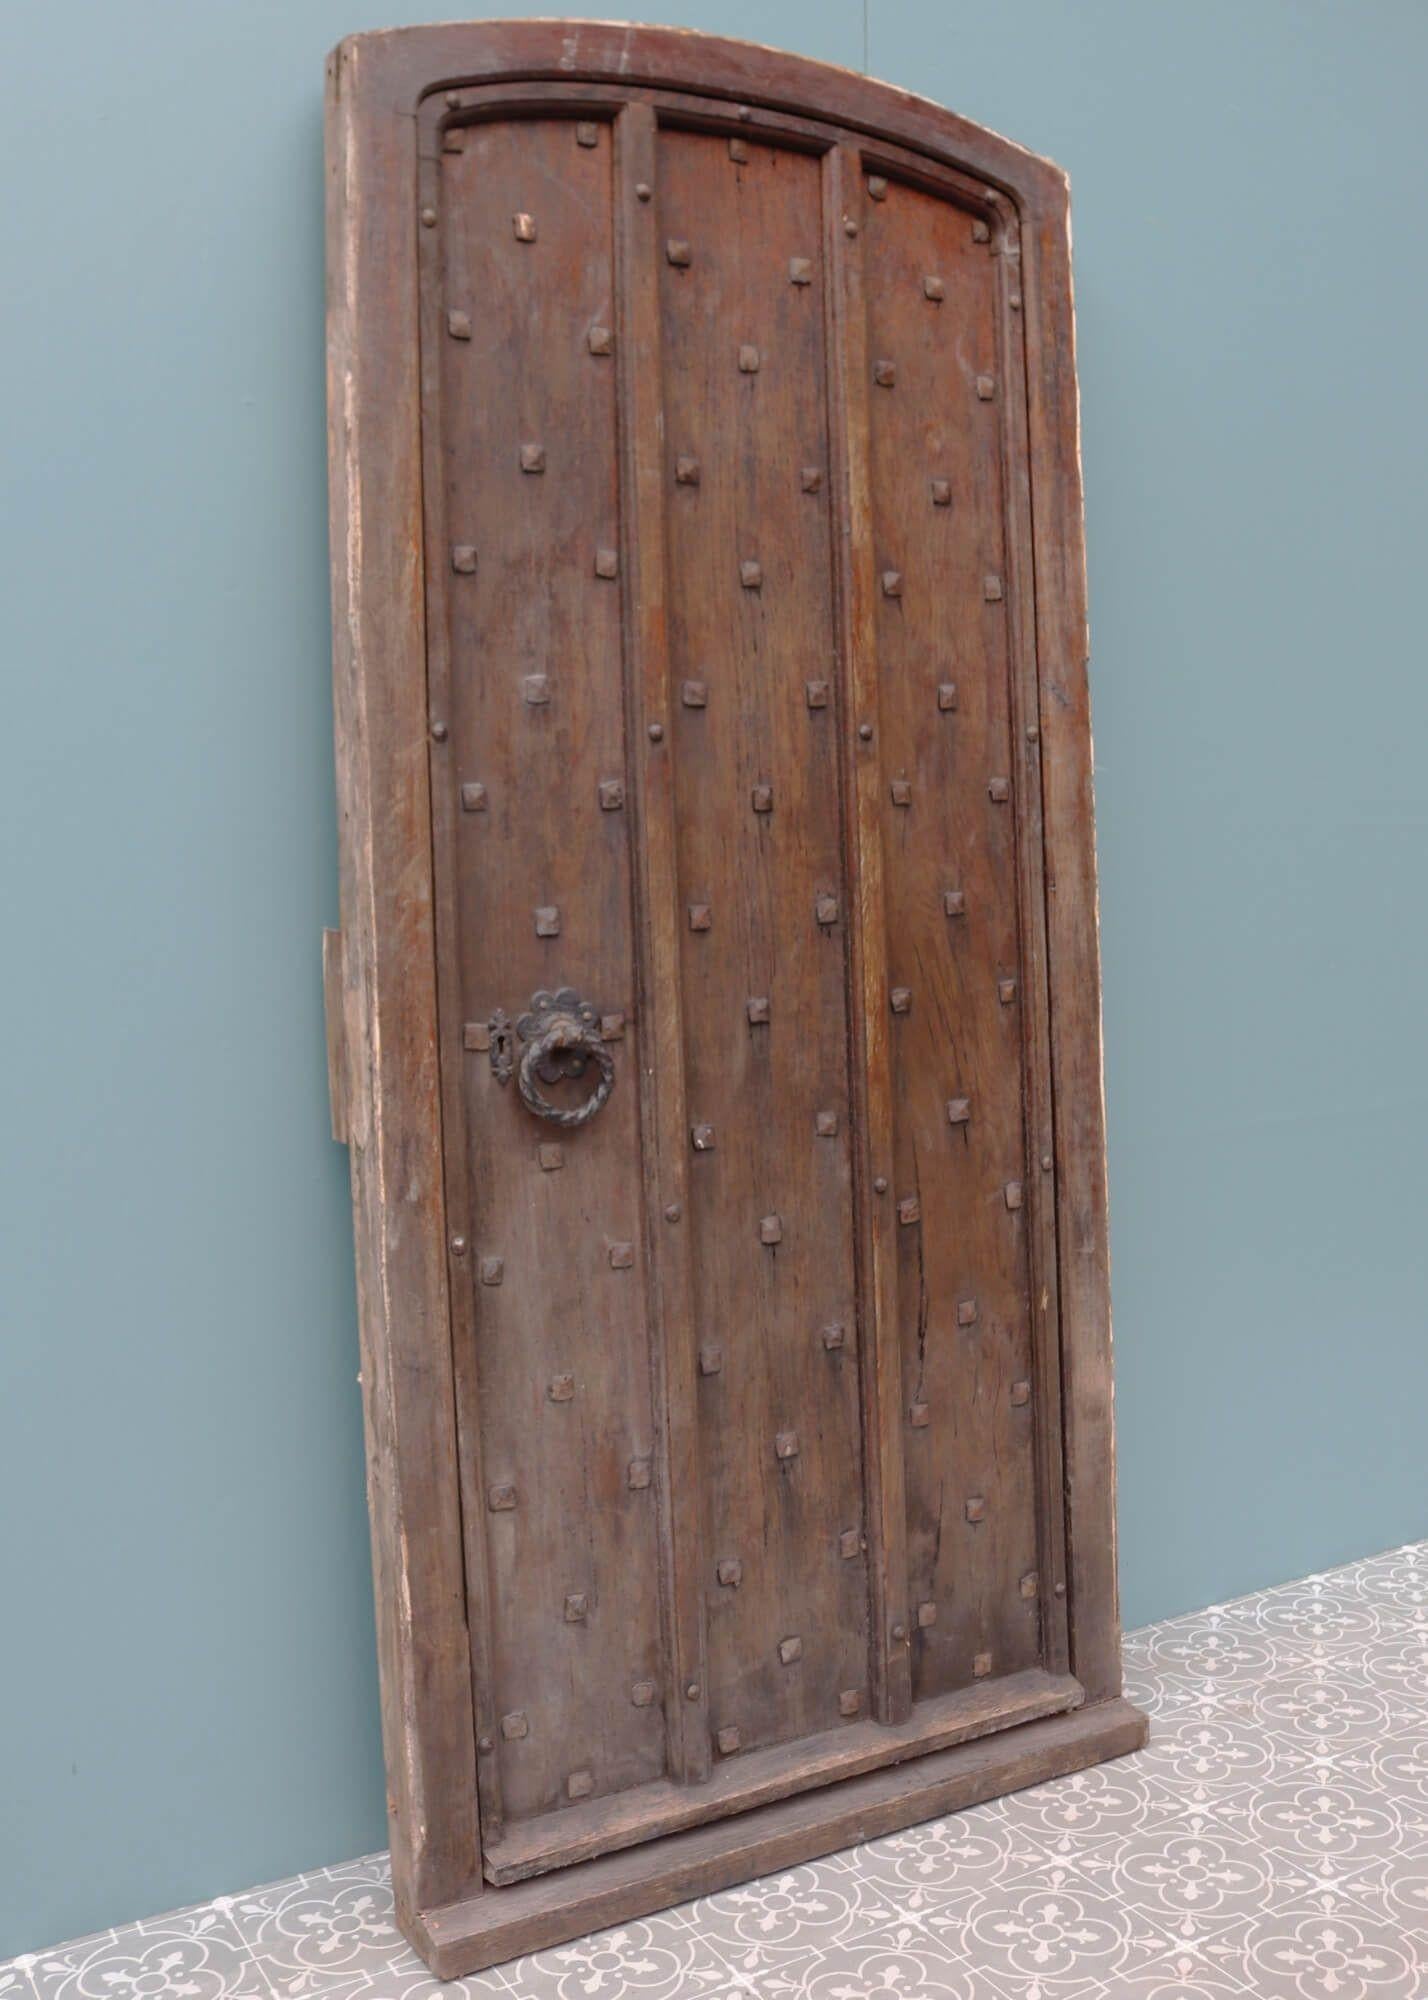 This thick studded oak door dates from the early 1900s. Perhaps it was once part of an entryway to a castle or church. Whatever its former use, this antique door with frame now makes a spectacular exterior door for a period property. Made in solid